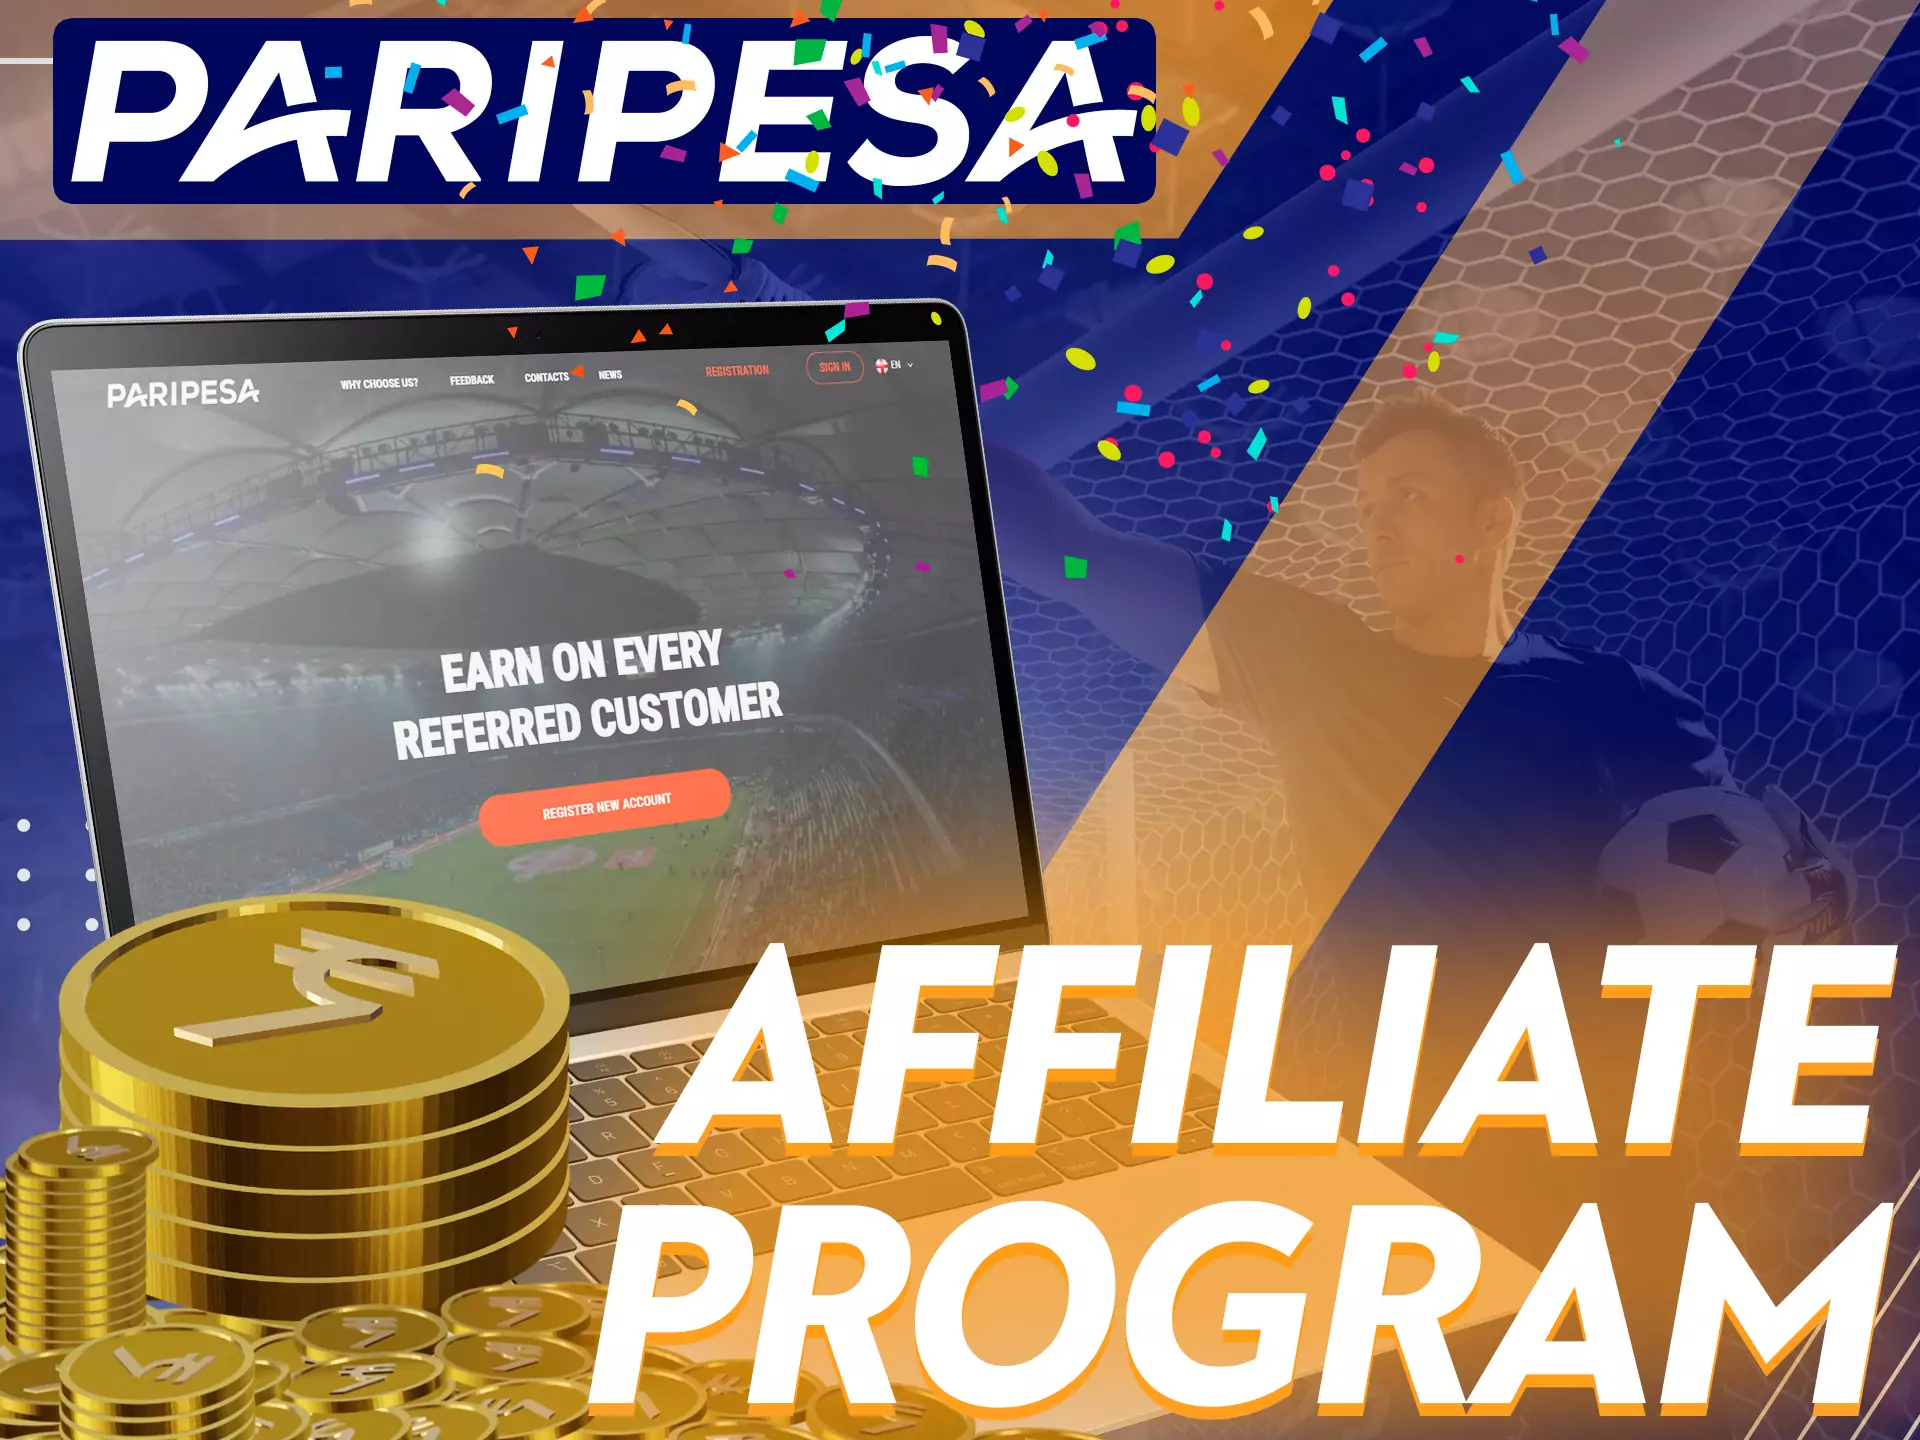 Paripesa offers to join a profitable affiliate program.